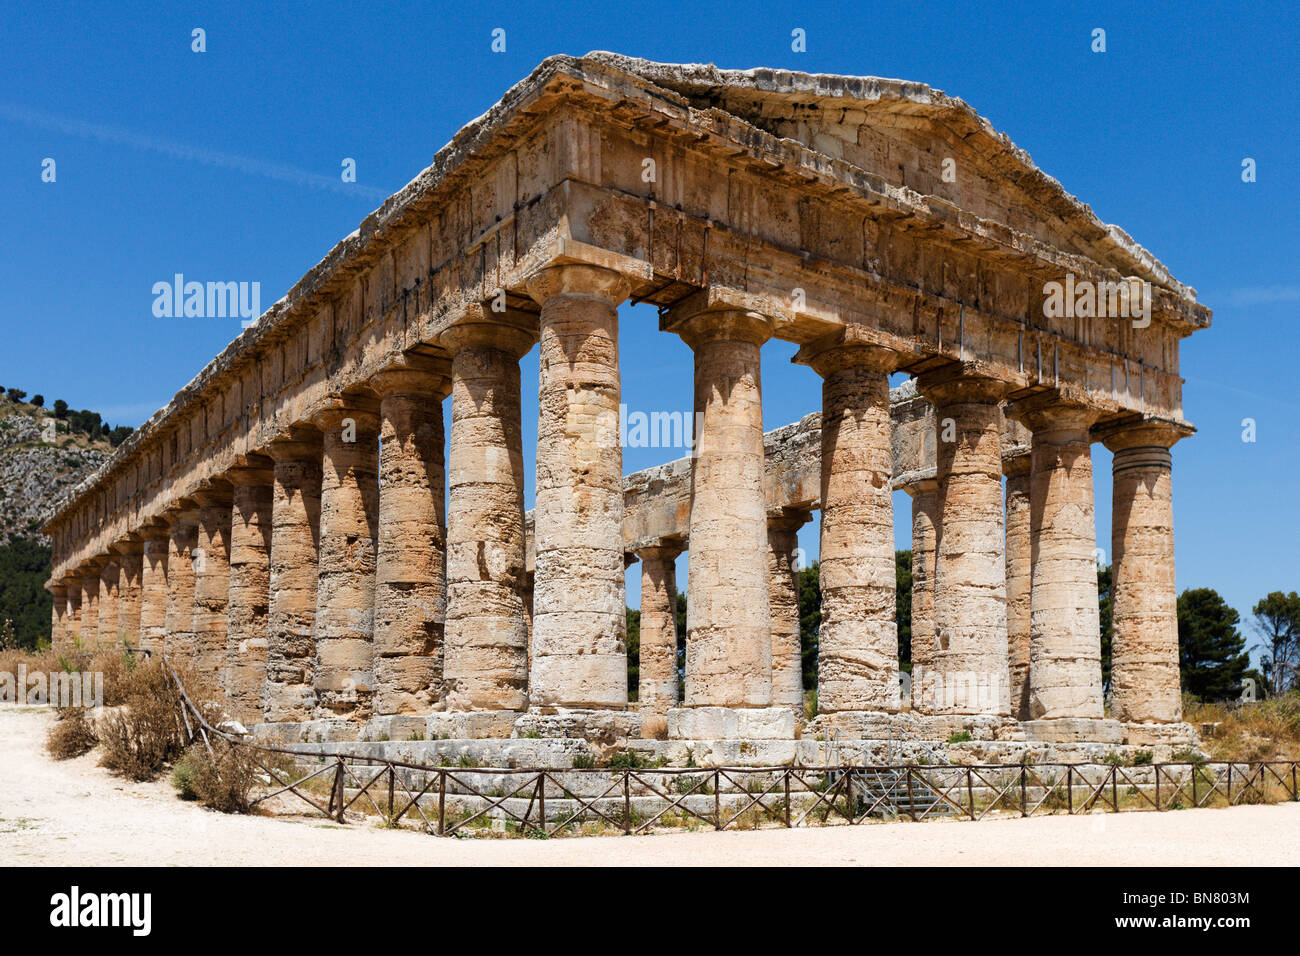 The Greek Temple at Segesta, Trapani region, north west Sicily, Italy Stock Photo